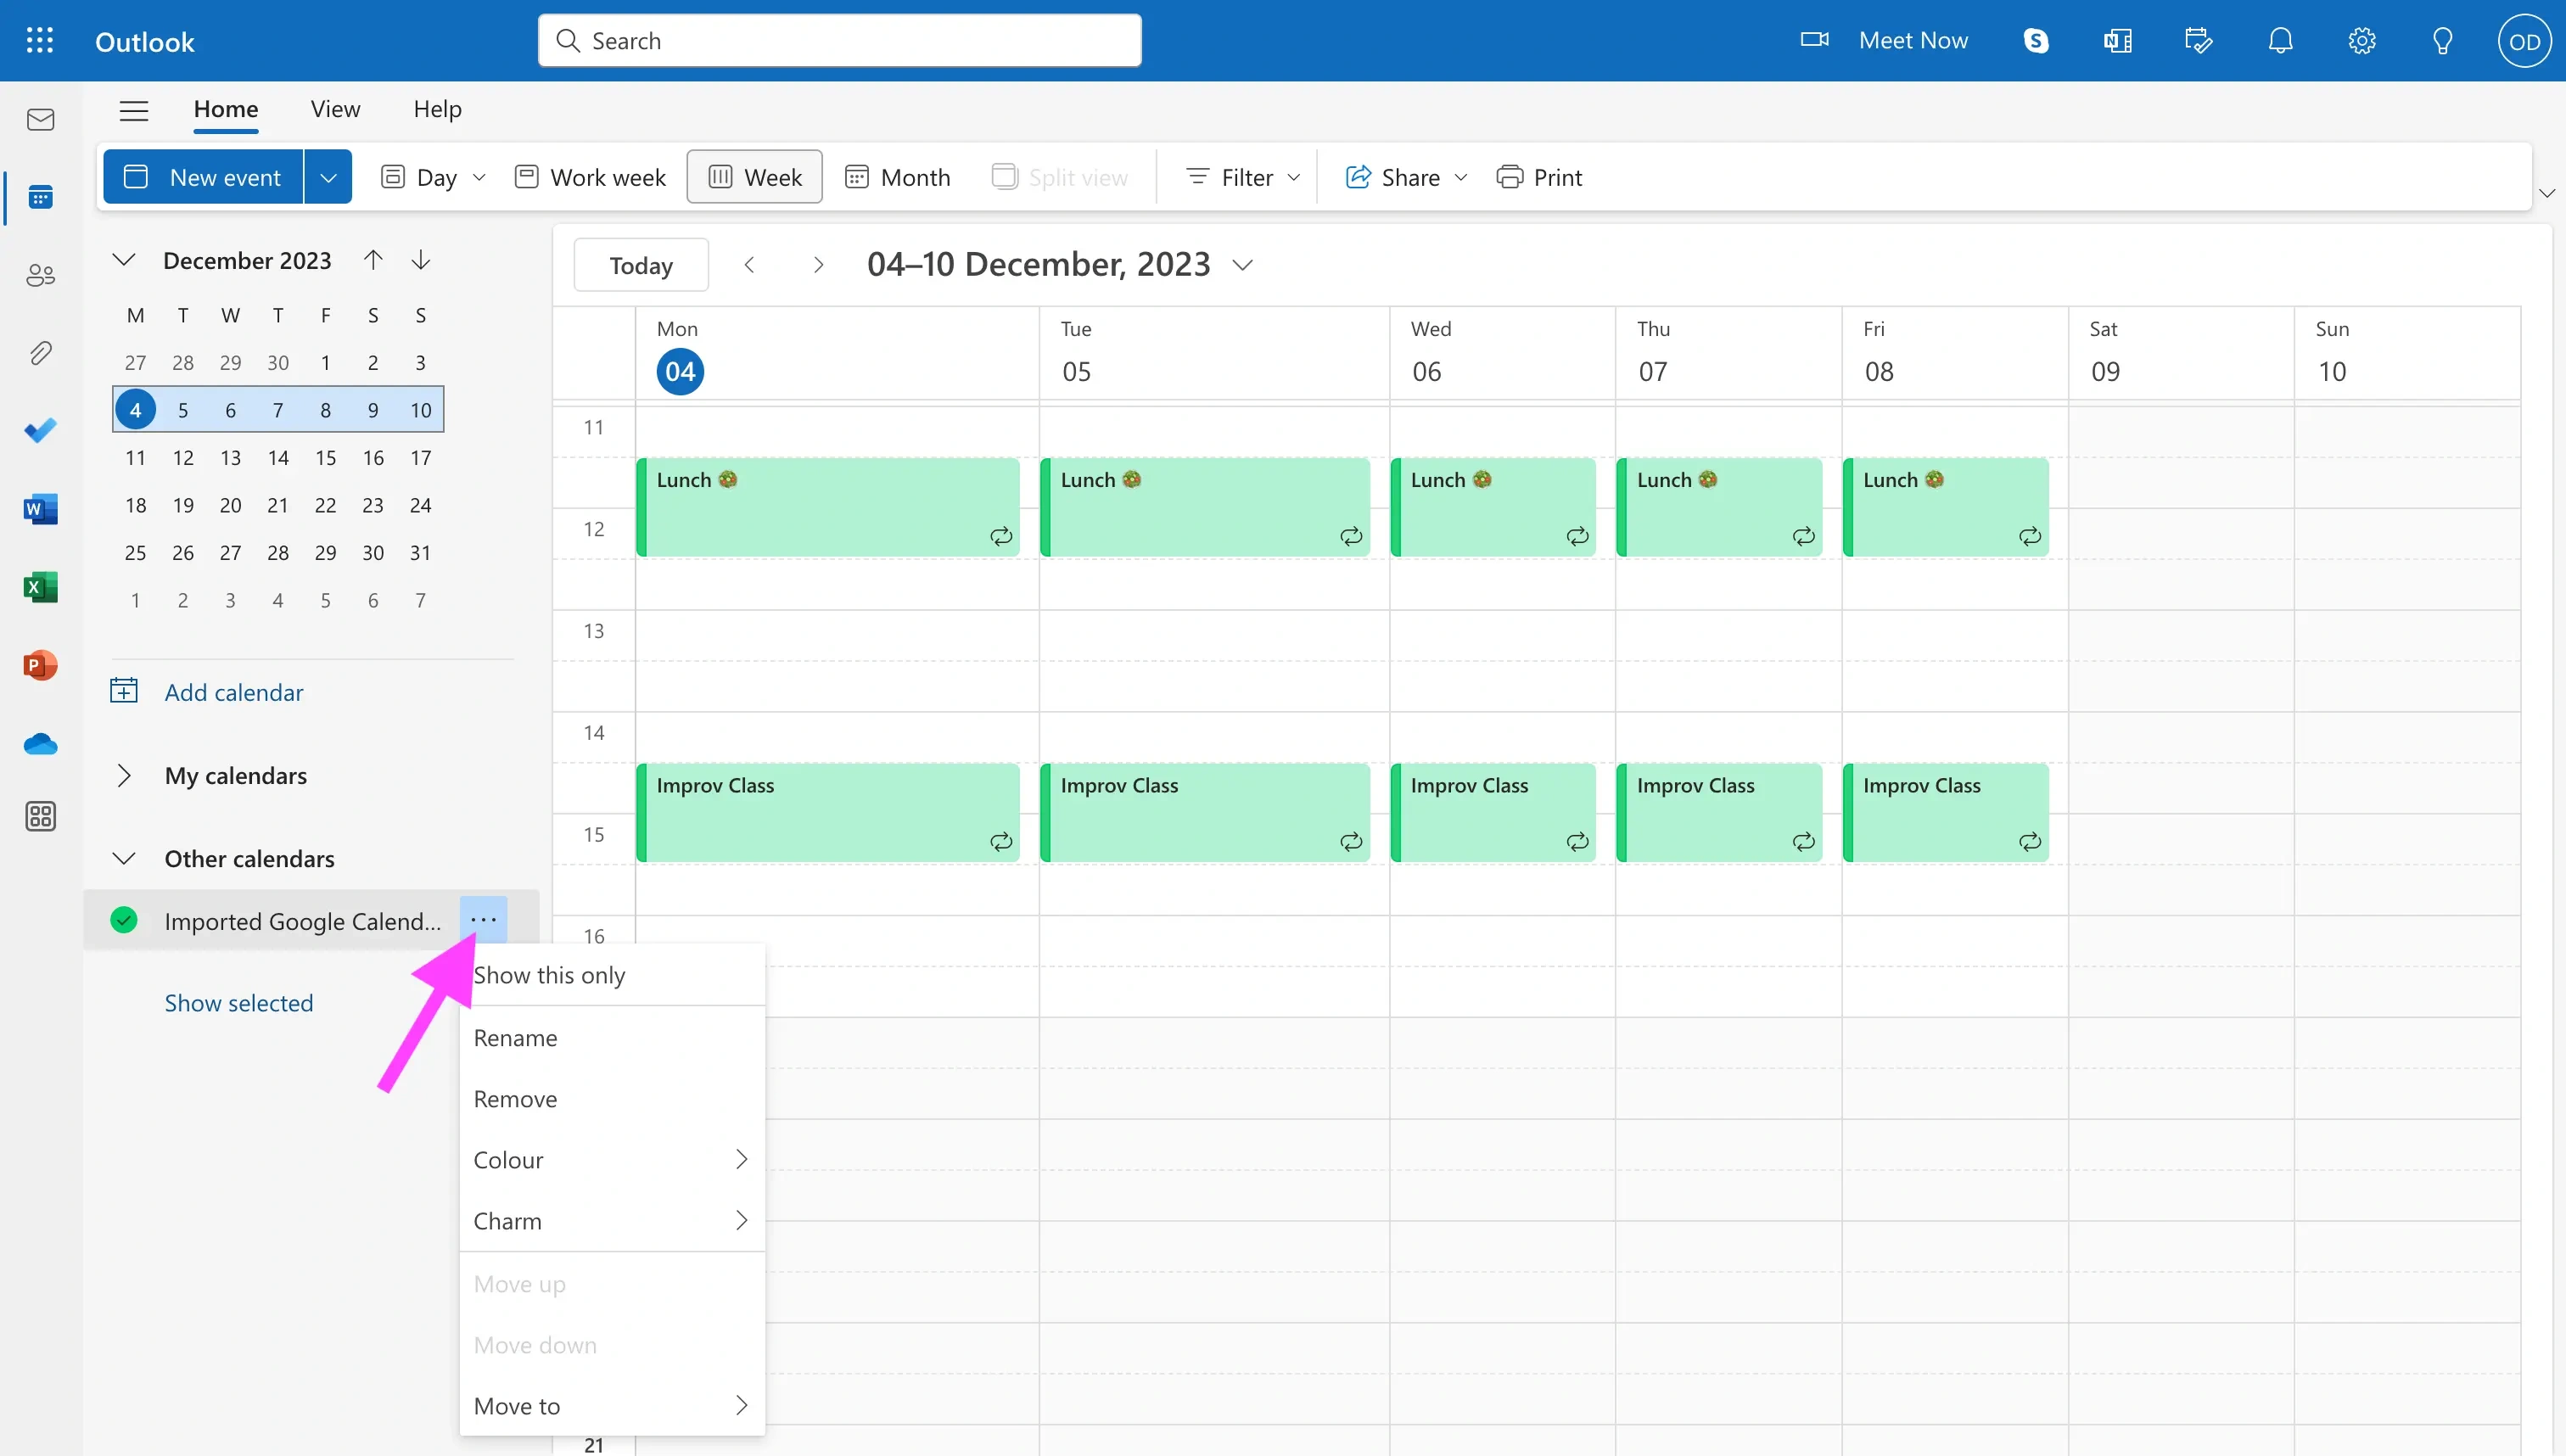 Outlook Calendar - Hover over the Calendar and click the three dots